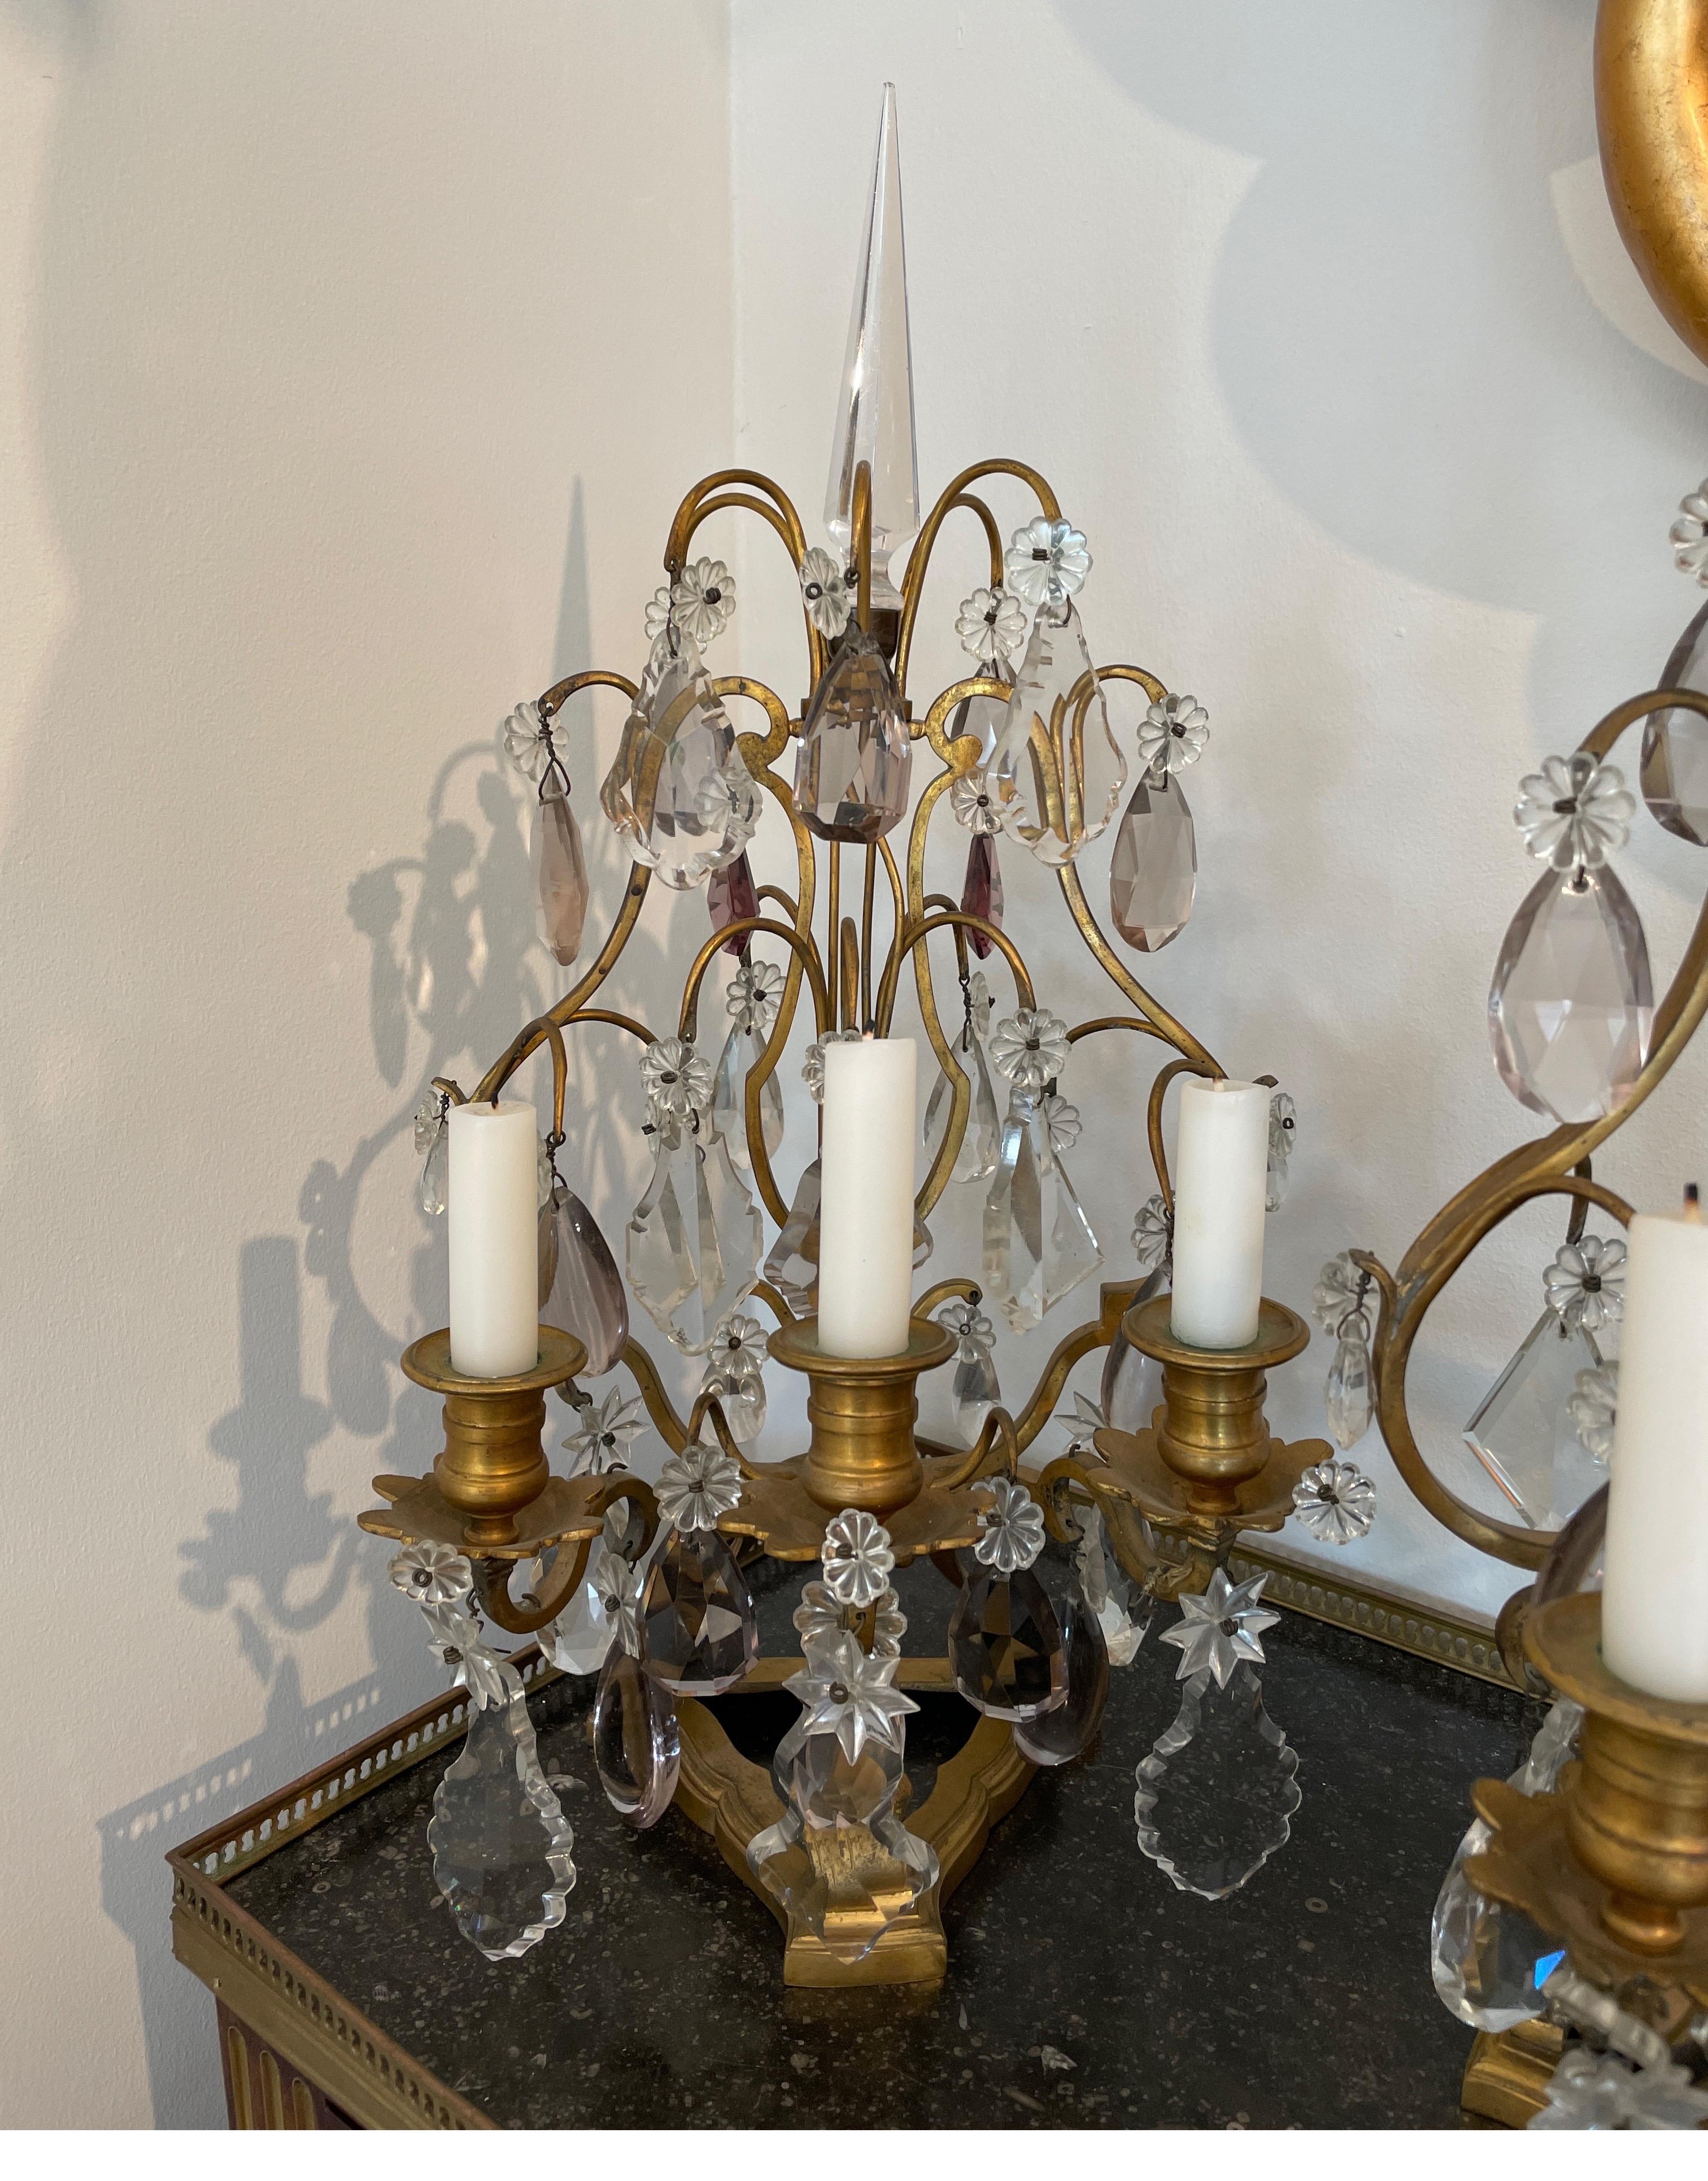 Vintage bronze & crystal girandoles with three arms for candles.